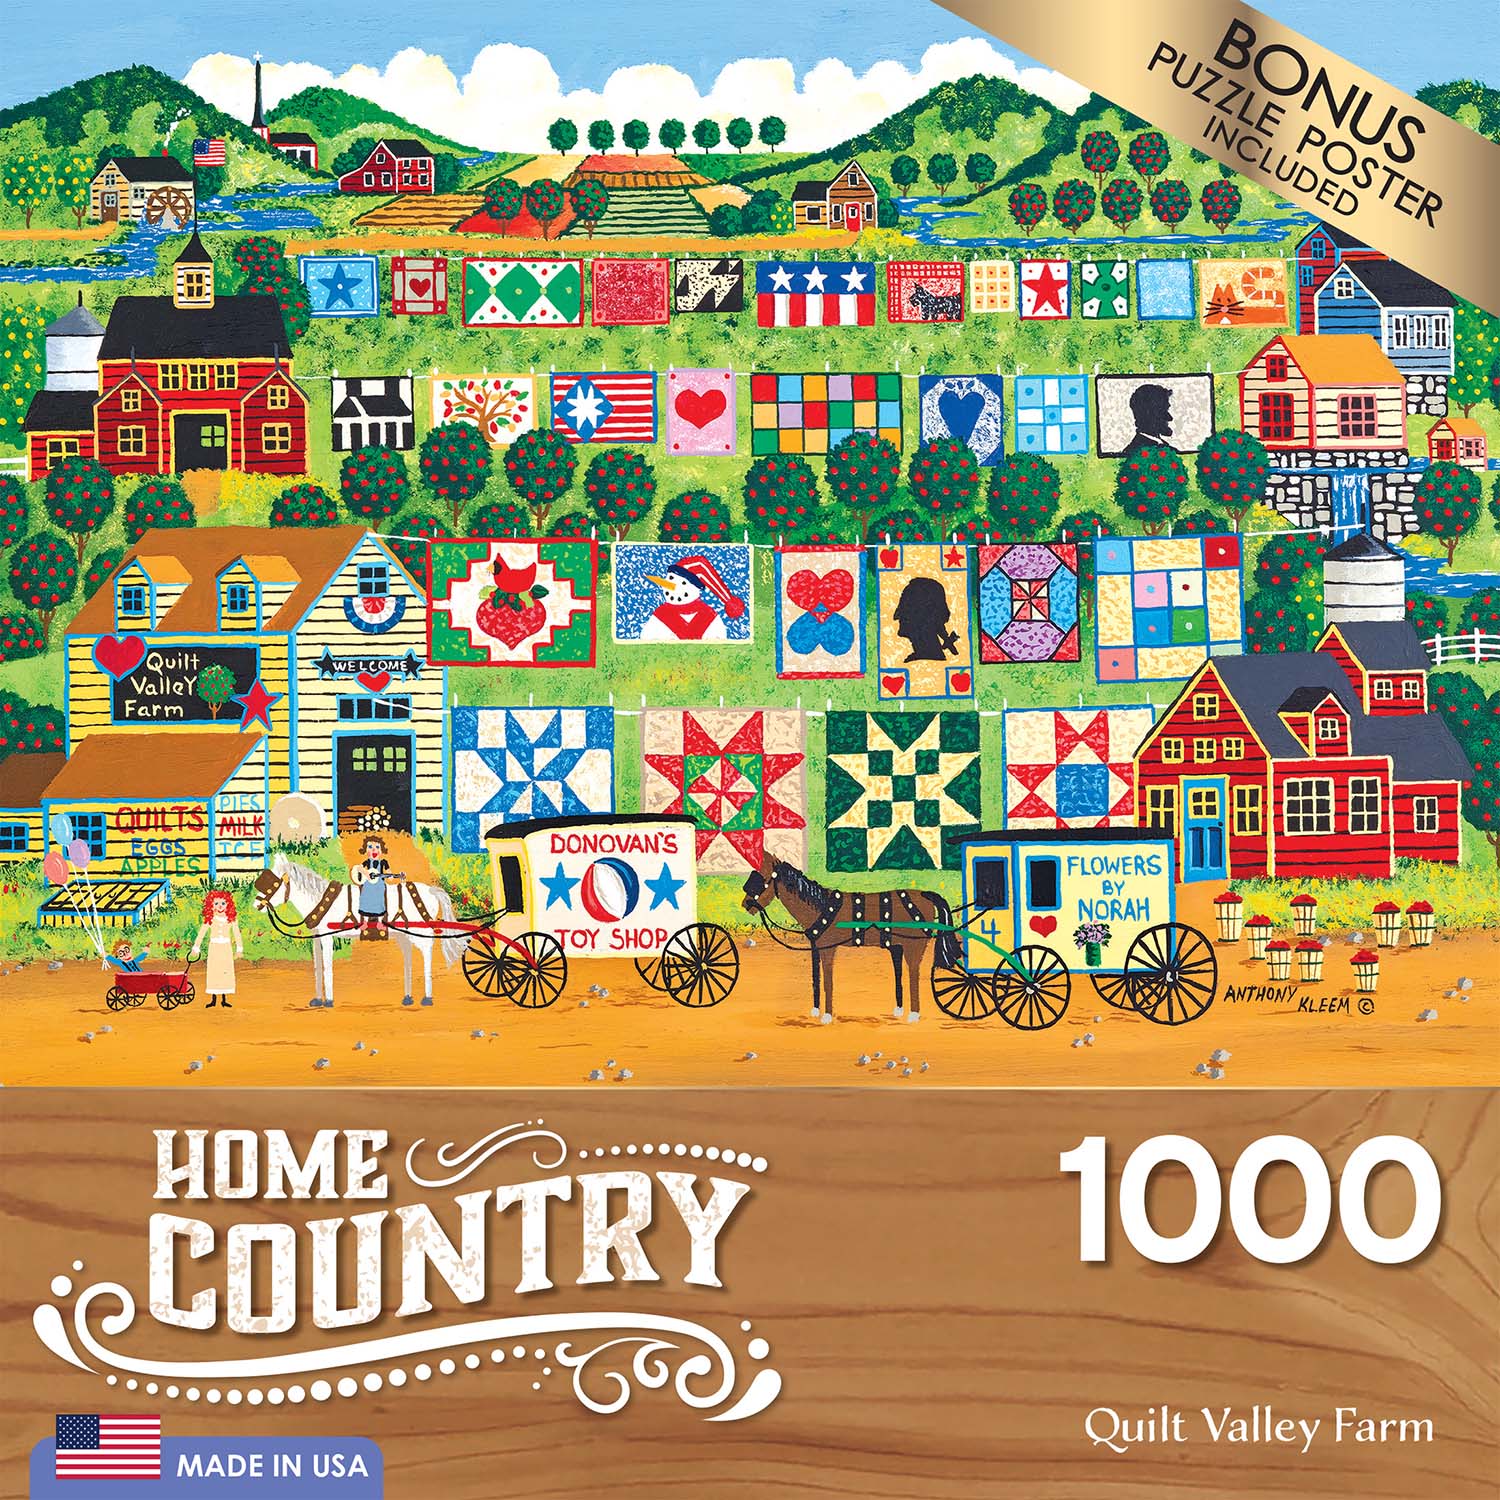 Home Country  - Quilt Valley Farm Countryside Jigsaw Puzzle